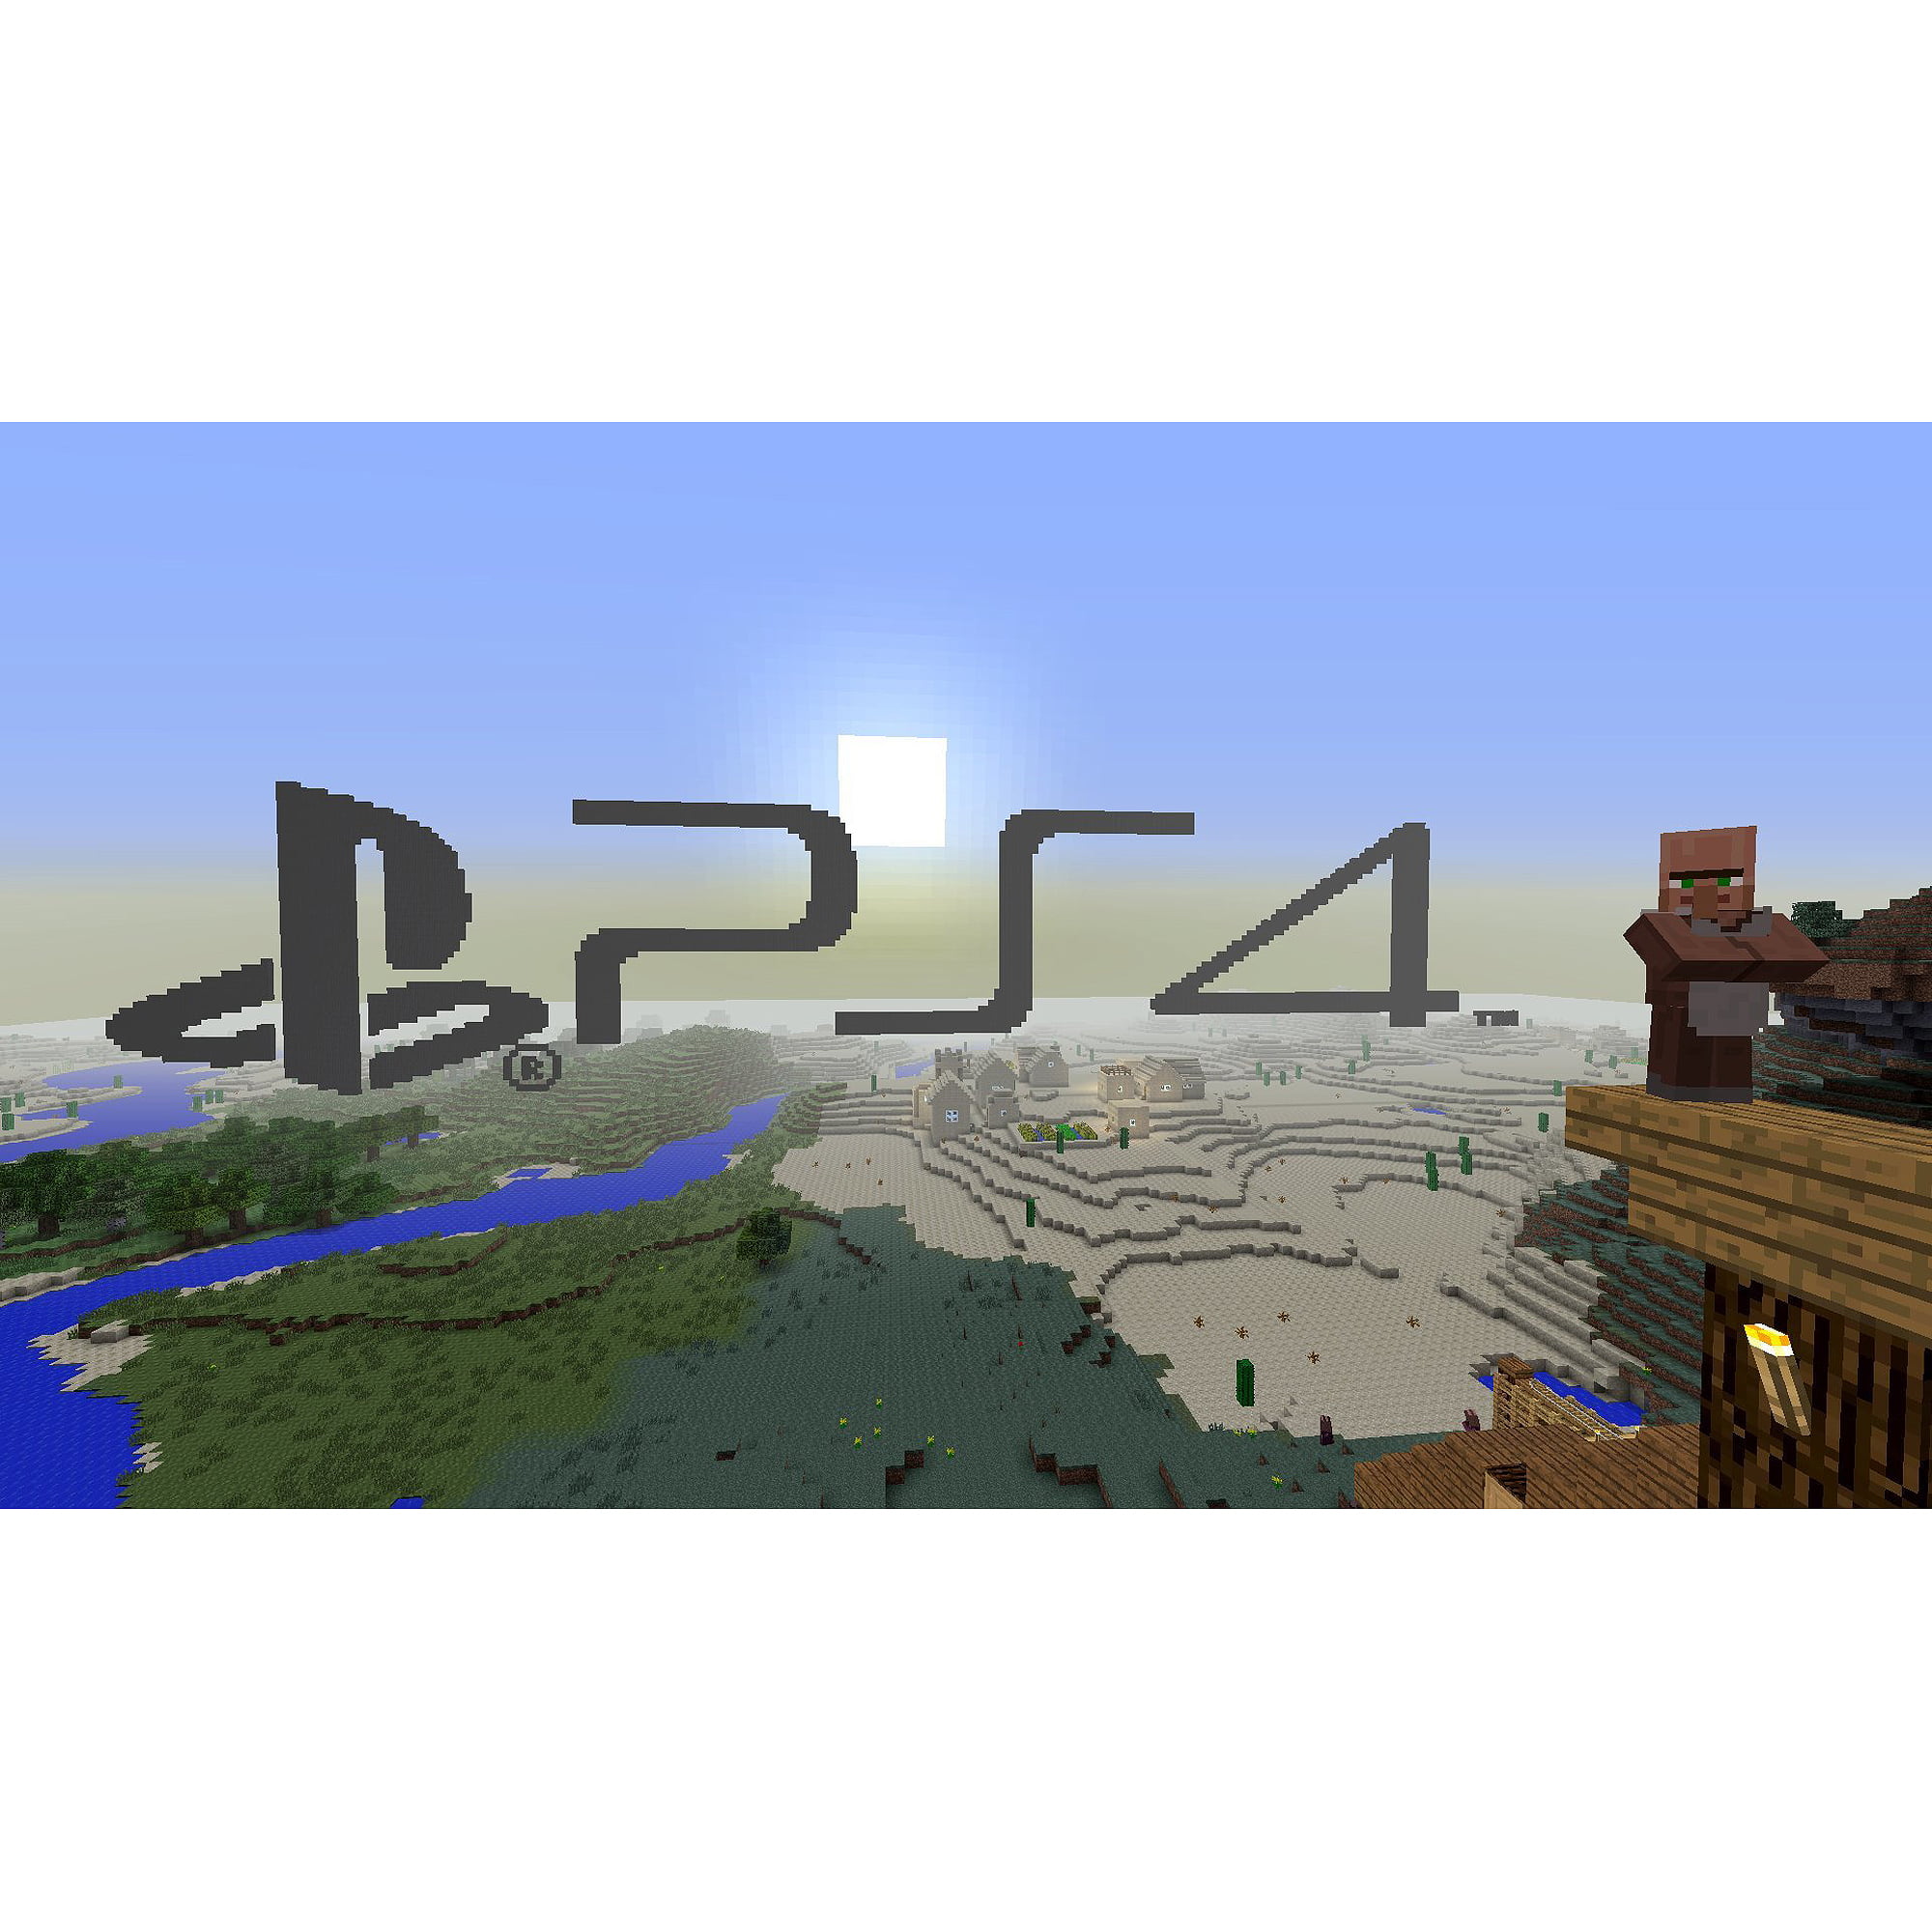 Ps3 - Minecraft PlayStation 3 Edition Sony PlayStation 3 Complete #111 –  vandalsgaming